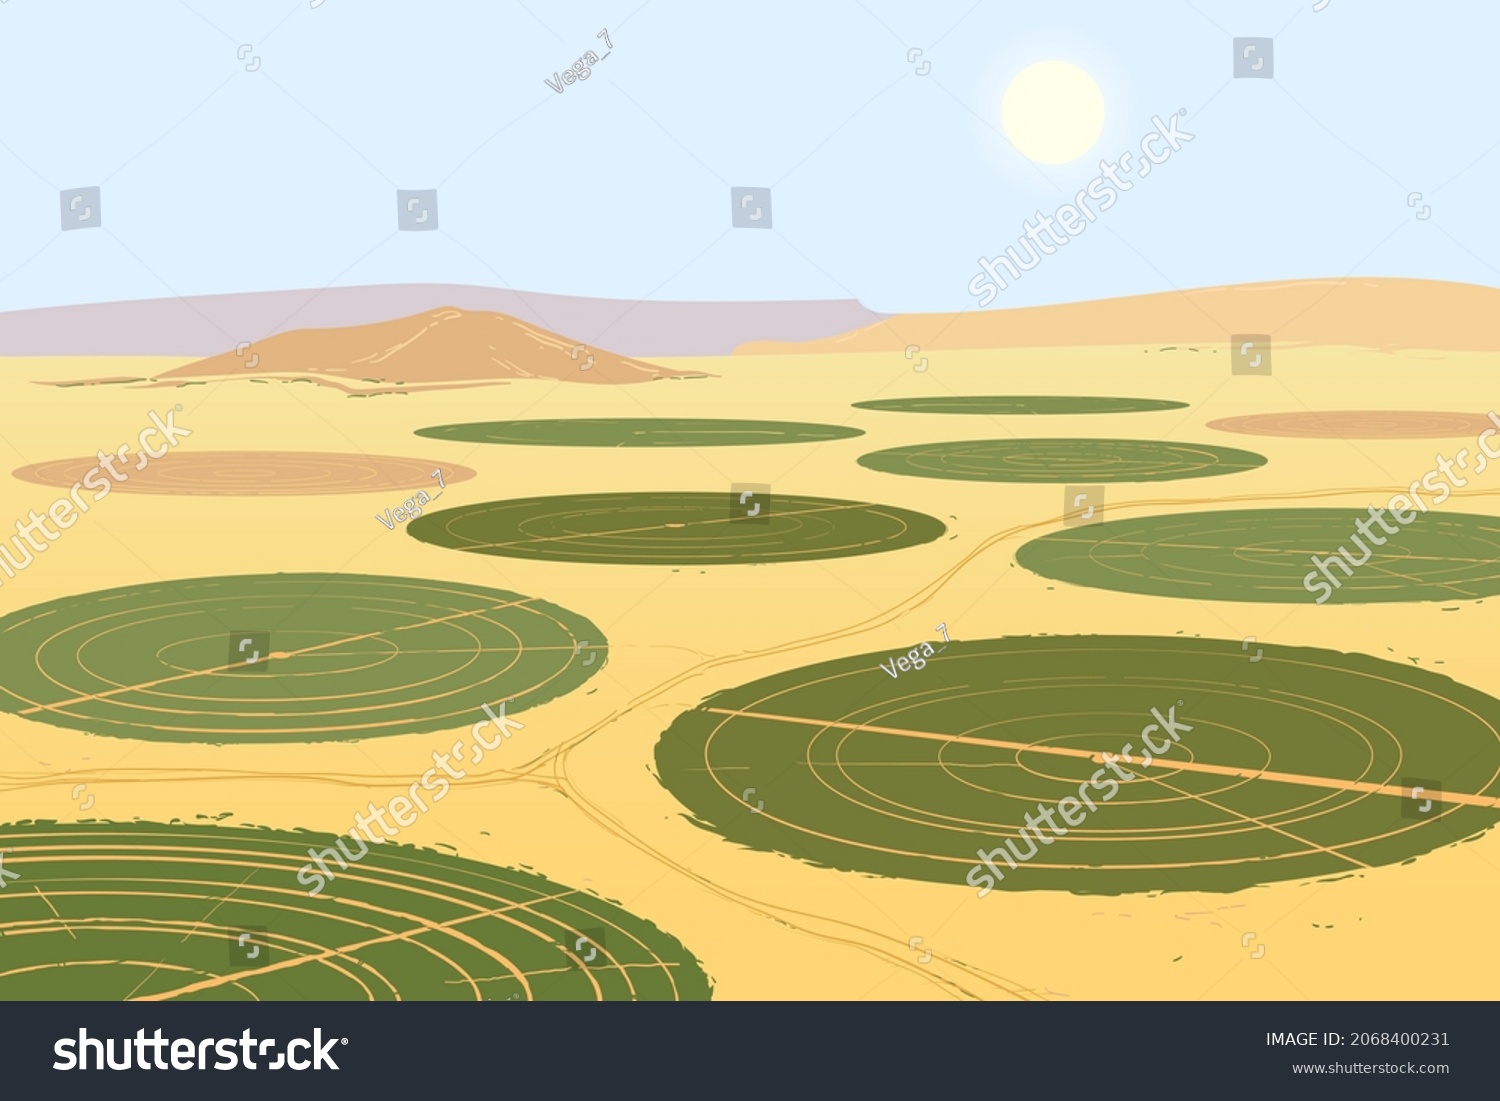 SVG of Landscape with surrounding agricultural fields in the desert. Technology of development of barren lands in arid regions. Circular irrigation system for growing food. Vector illustration. svg